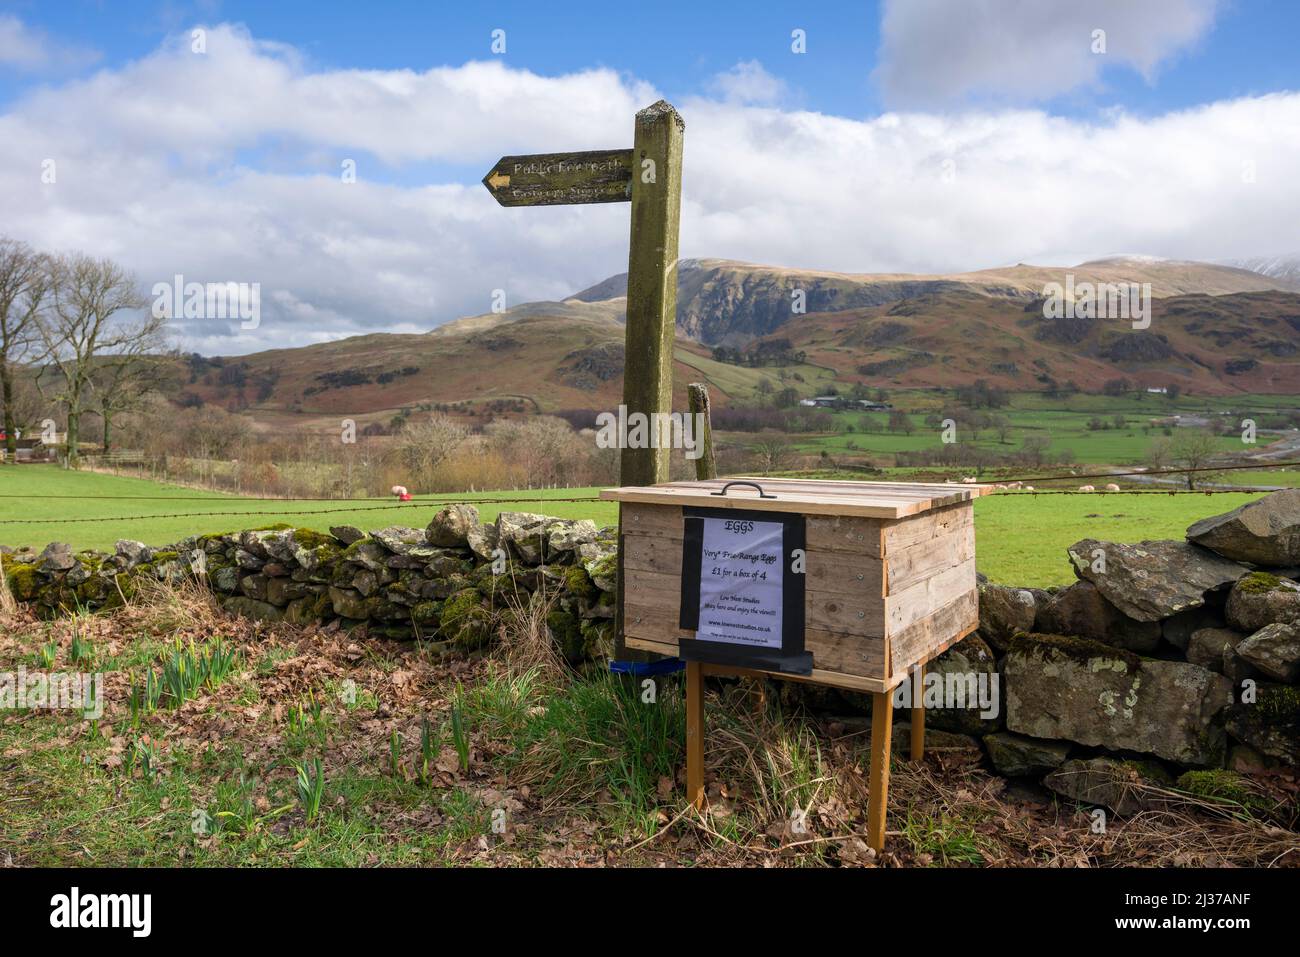 Free range eggs for sale next to a footpath sign to Castlerigg Stone Circle in the Lake District National Park, Cumbria, England. Stock Photo